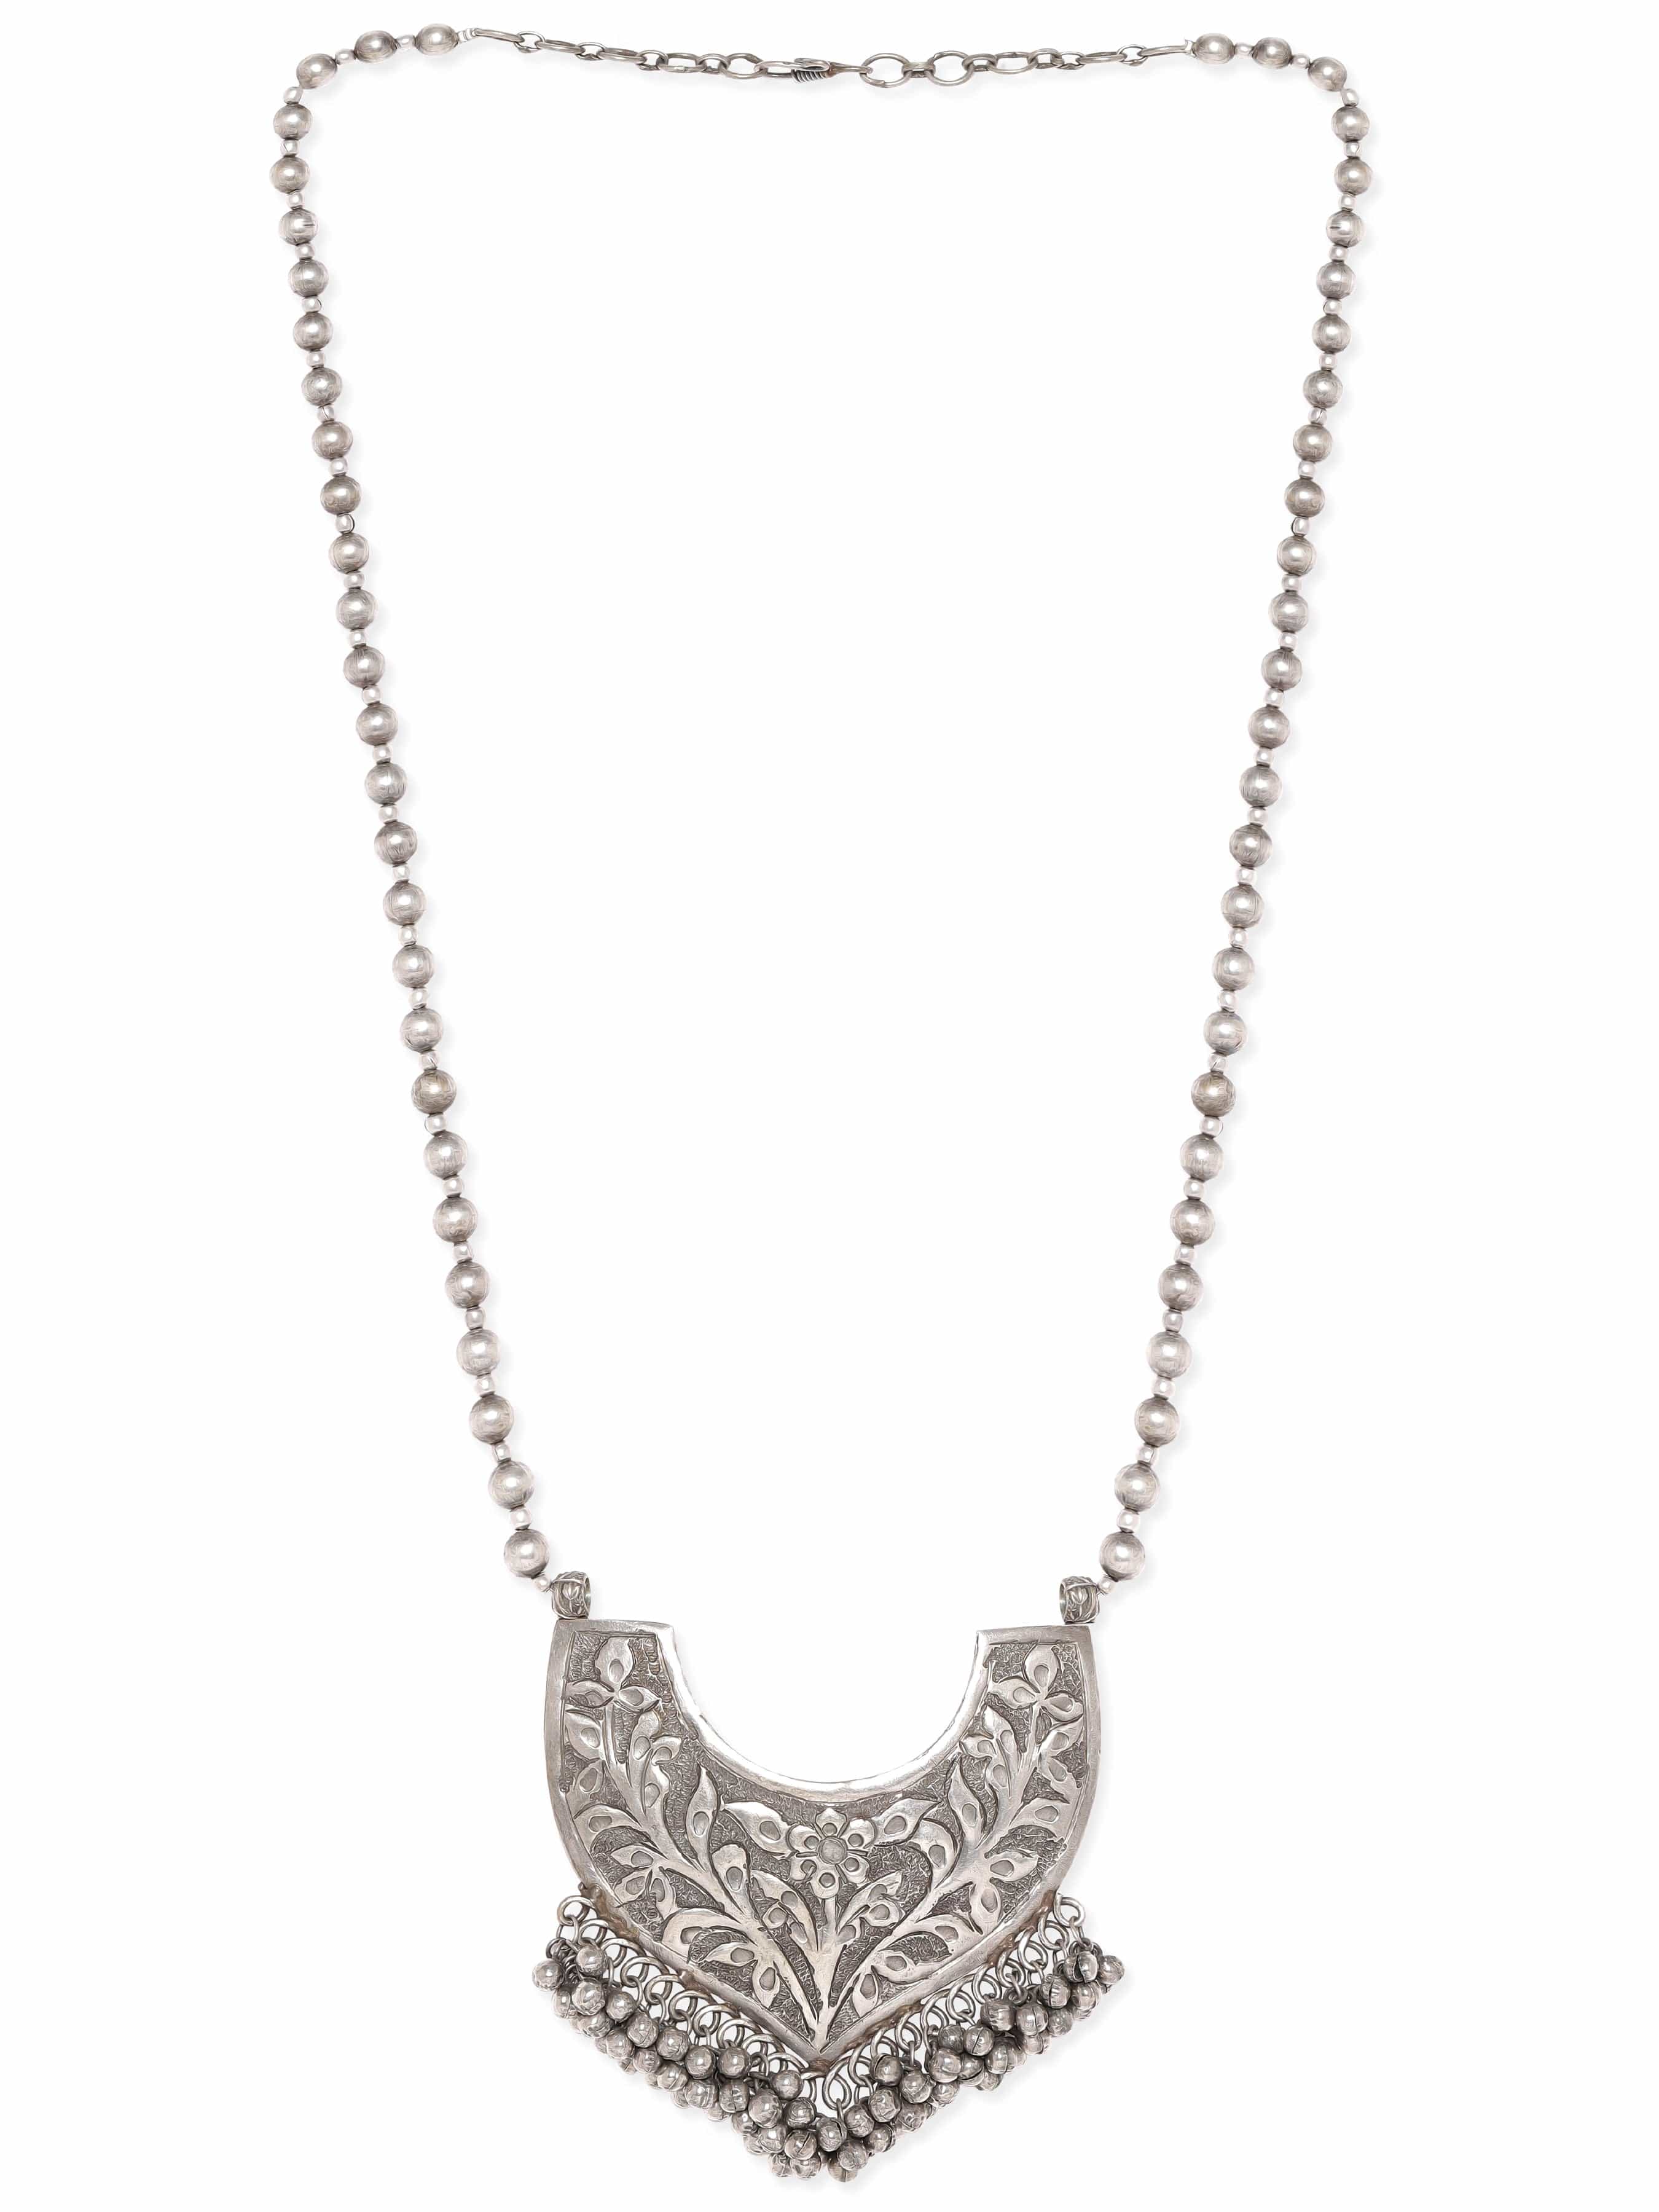 Best Locket Necklace Styles | With Clarity